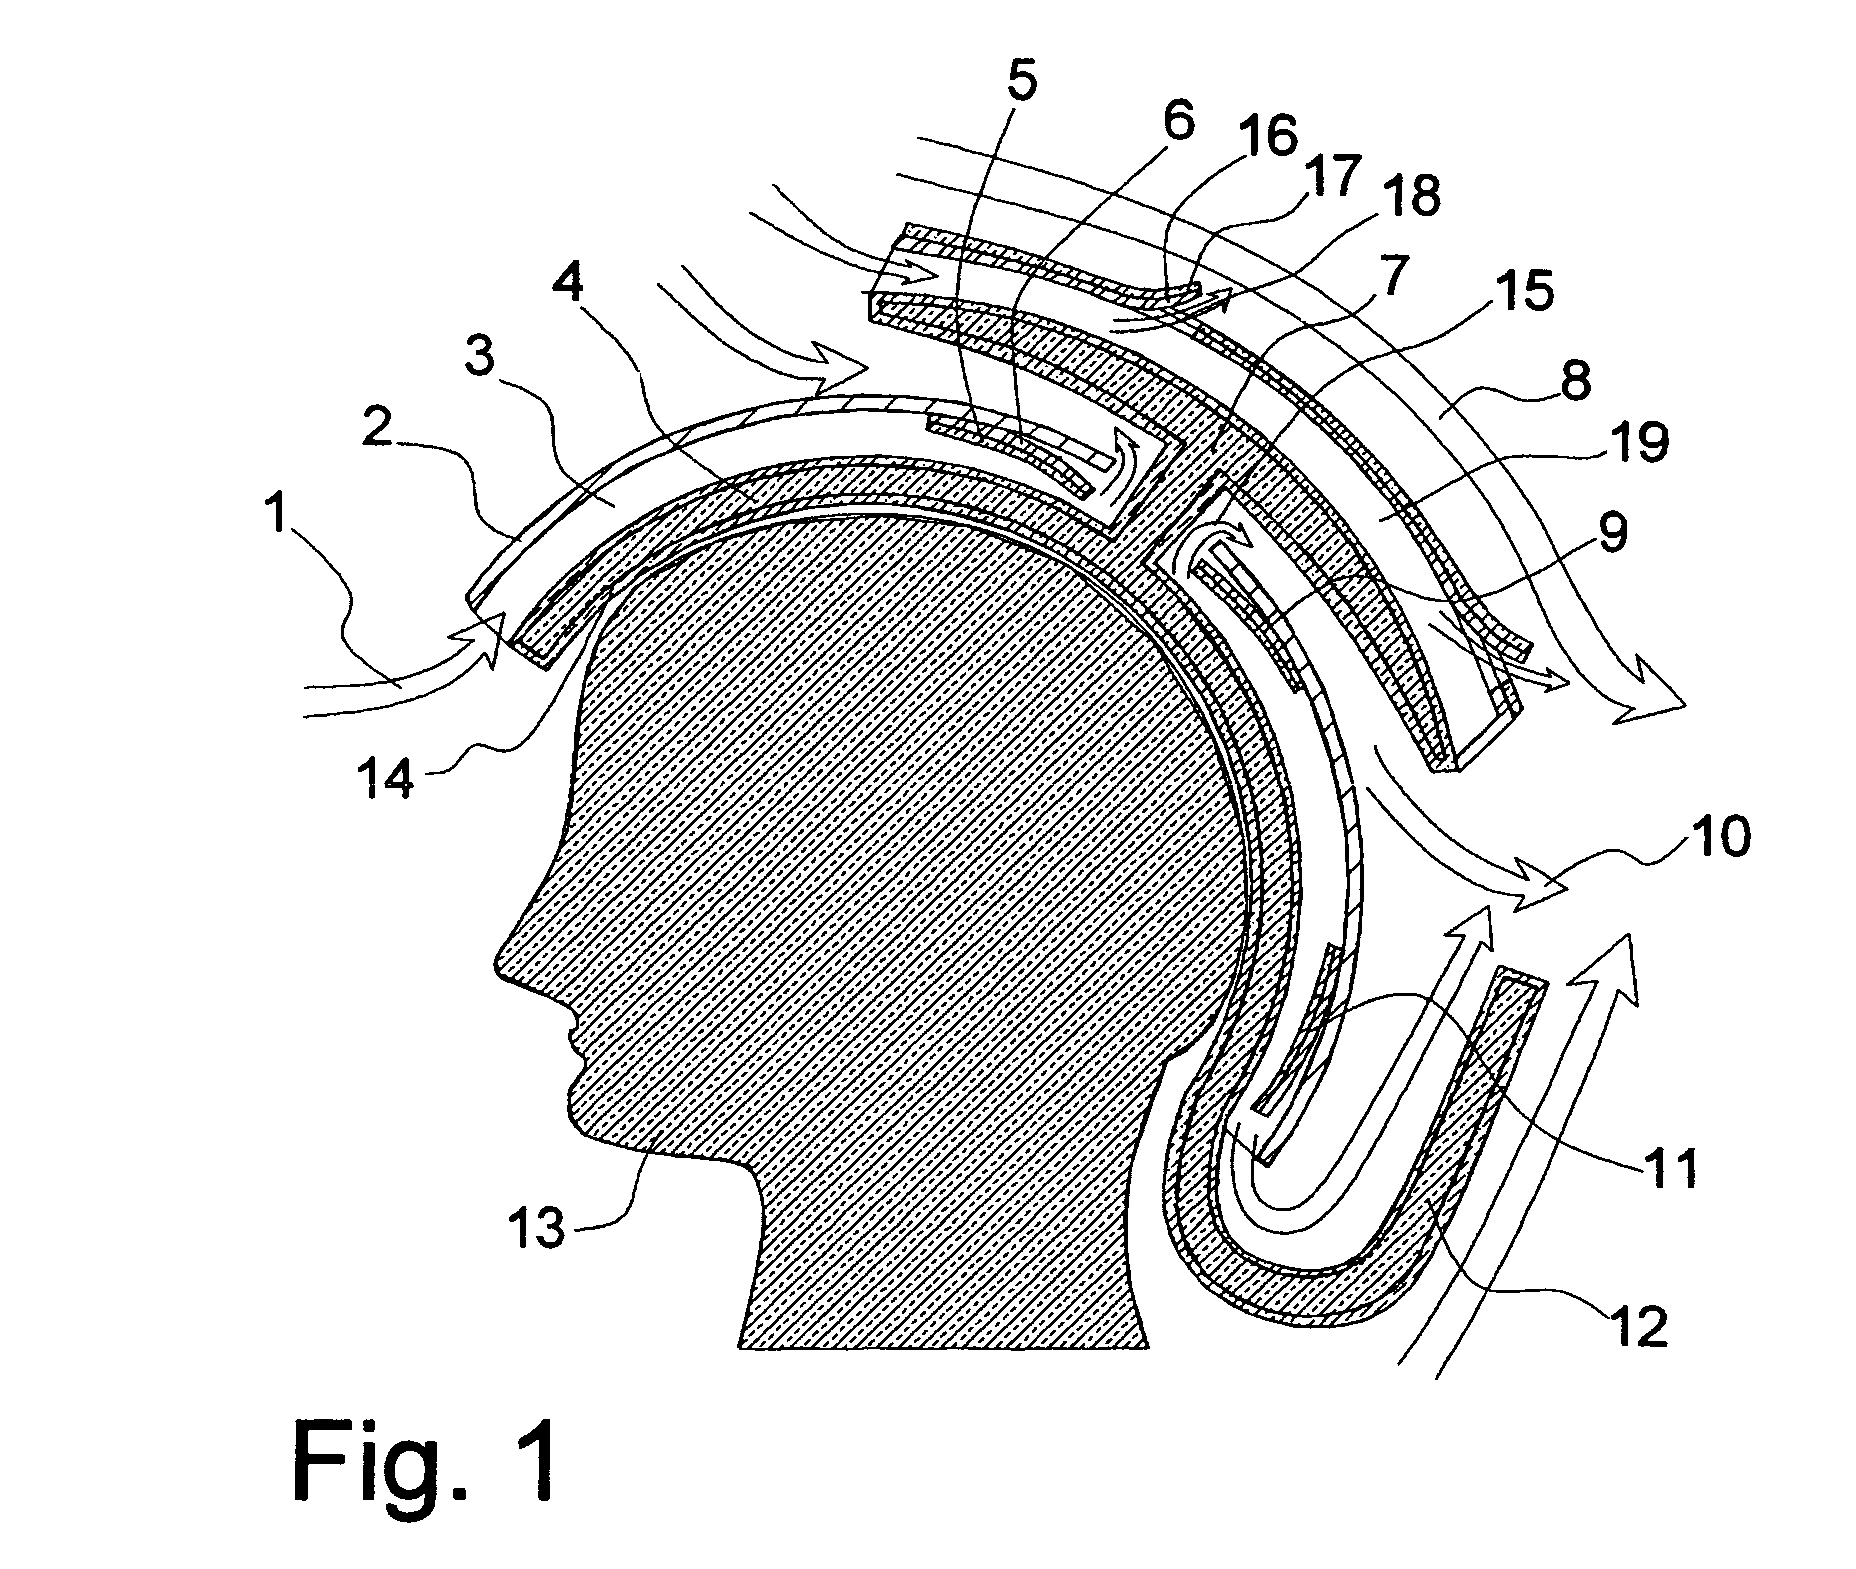 Helmet and body armor actuated ventilation and heat pipes